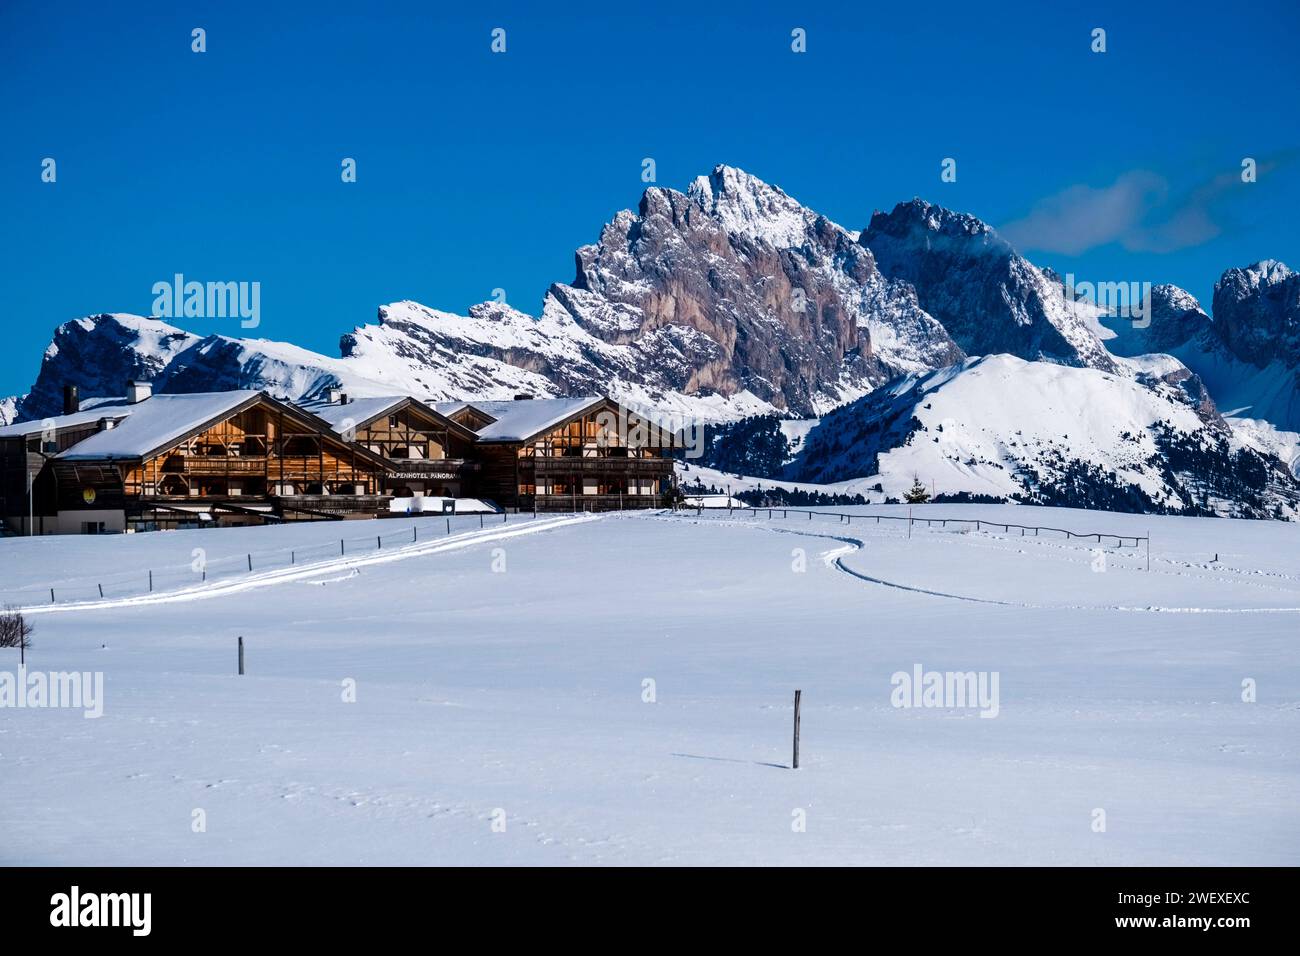 Hilly agricultural countryside with the Alpenhotel Panorama and snow-covered pastures at Seiser Alm, in winter, summits of Odle group in the distance. Stock Photo